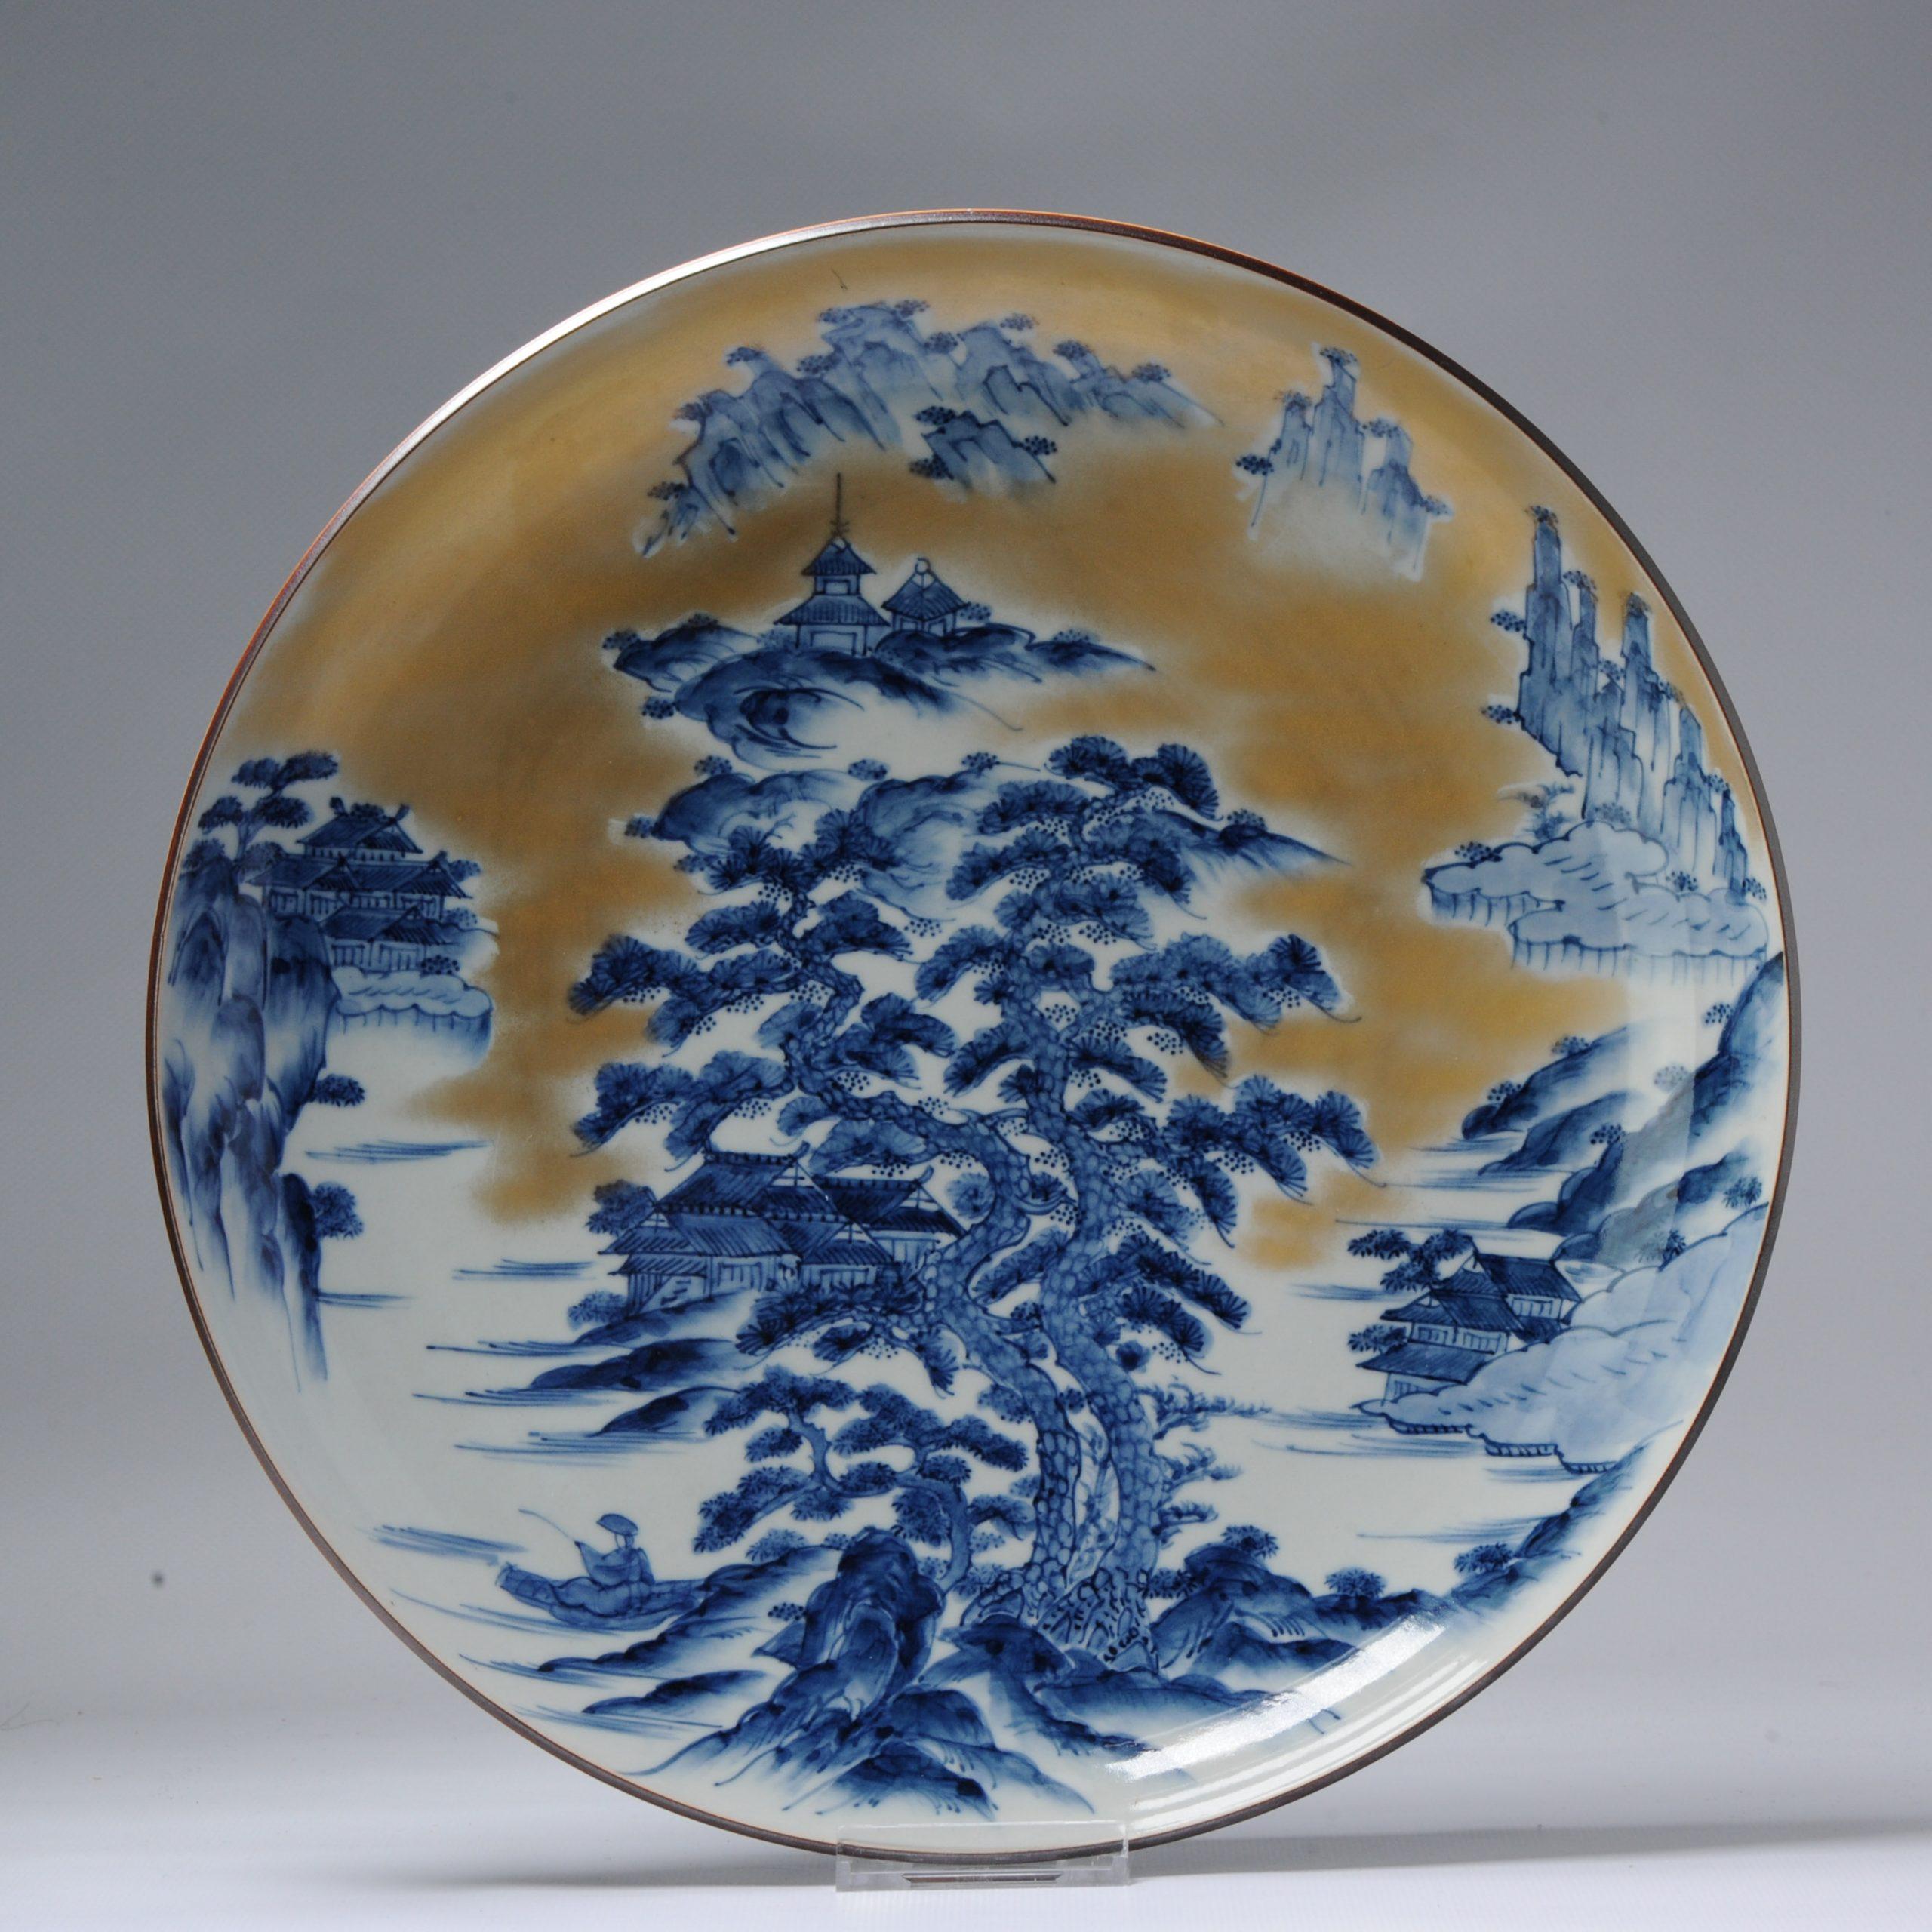 Description

Sharing with you this large and Fabulous Japanese charger in amazing colors.

Box included

Condition
Perfect. Size 340 x 60mm D x H

Period
20th century Showa Periode (1926-1989).